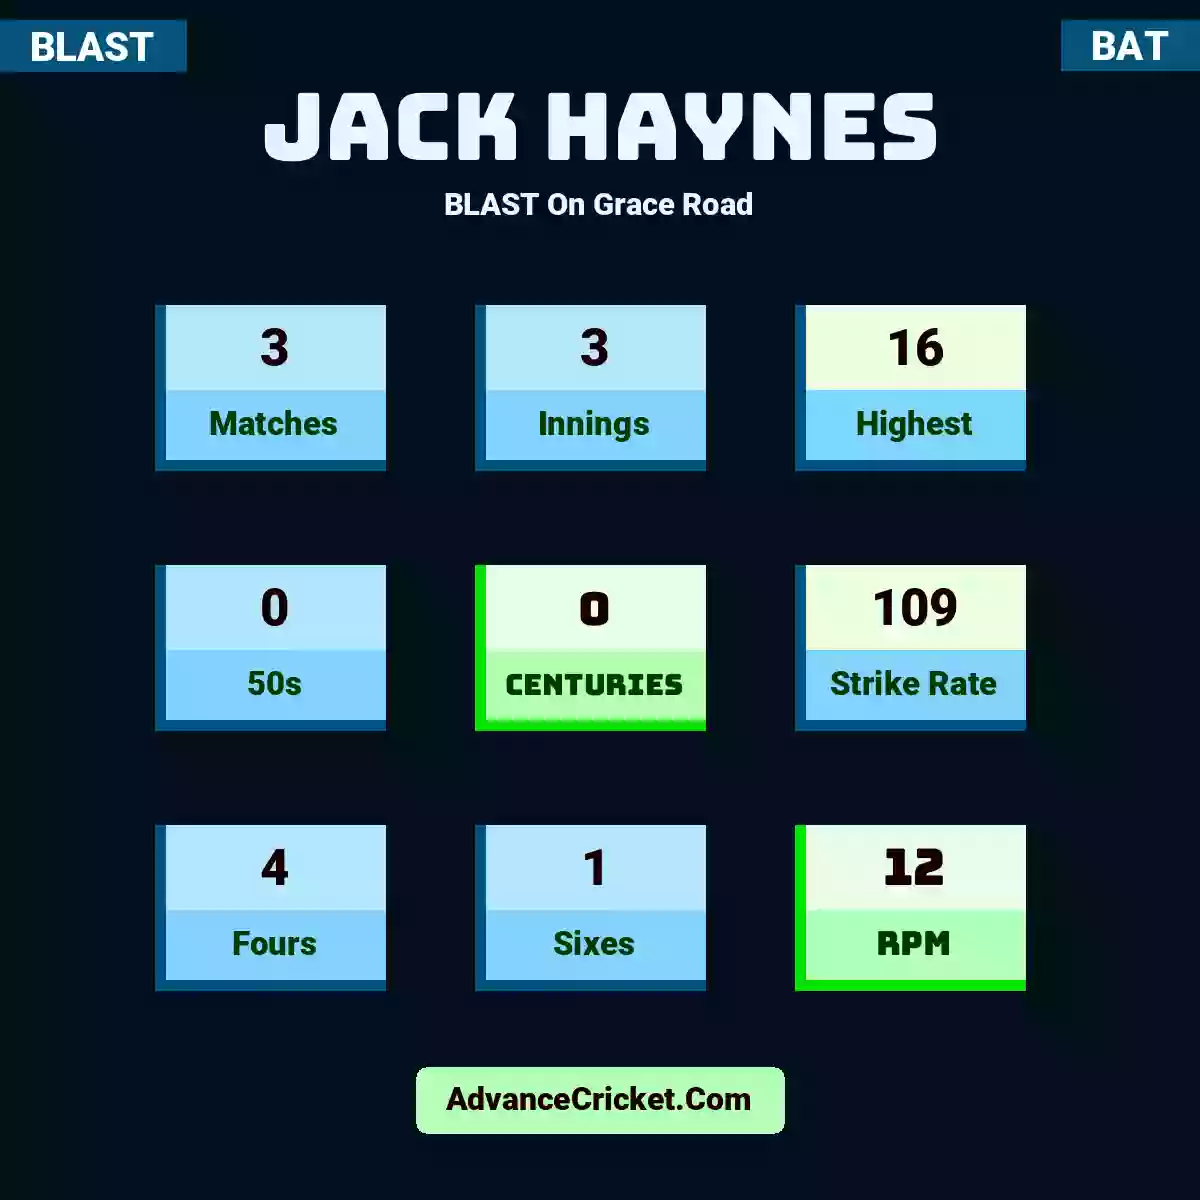 Jack Haynes BLAST  On Grace Road, Jack Haynes played 3 matches, scored 16 runs as highest, 0 half-centuries, and 0 centuries, with a strike rate of 109. J.Haynes hit 4 fours and 1 sixes, with an RPM of 12.